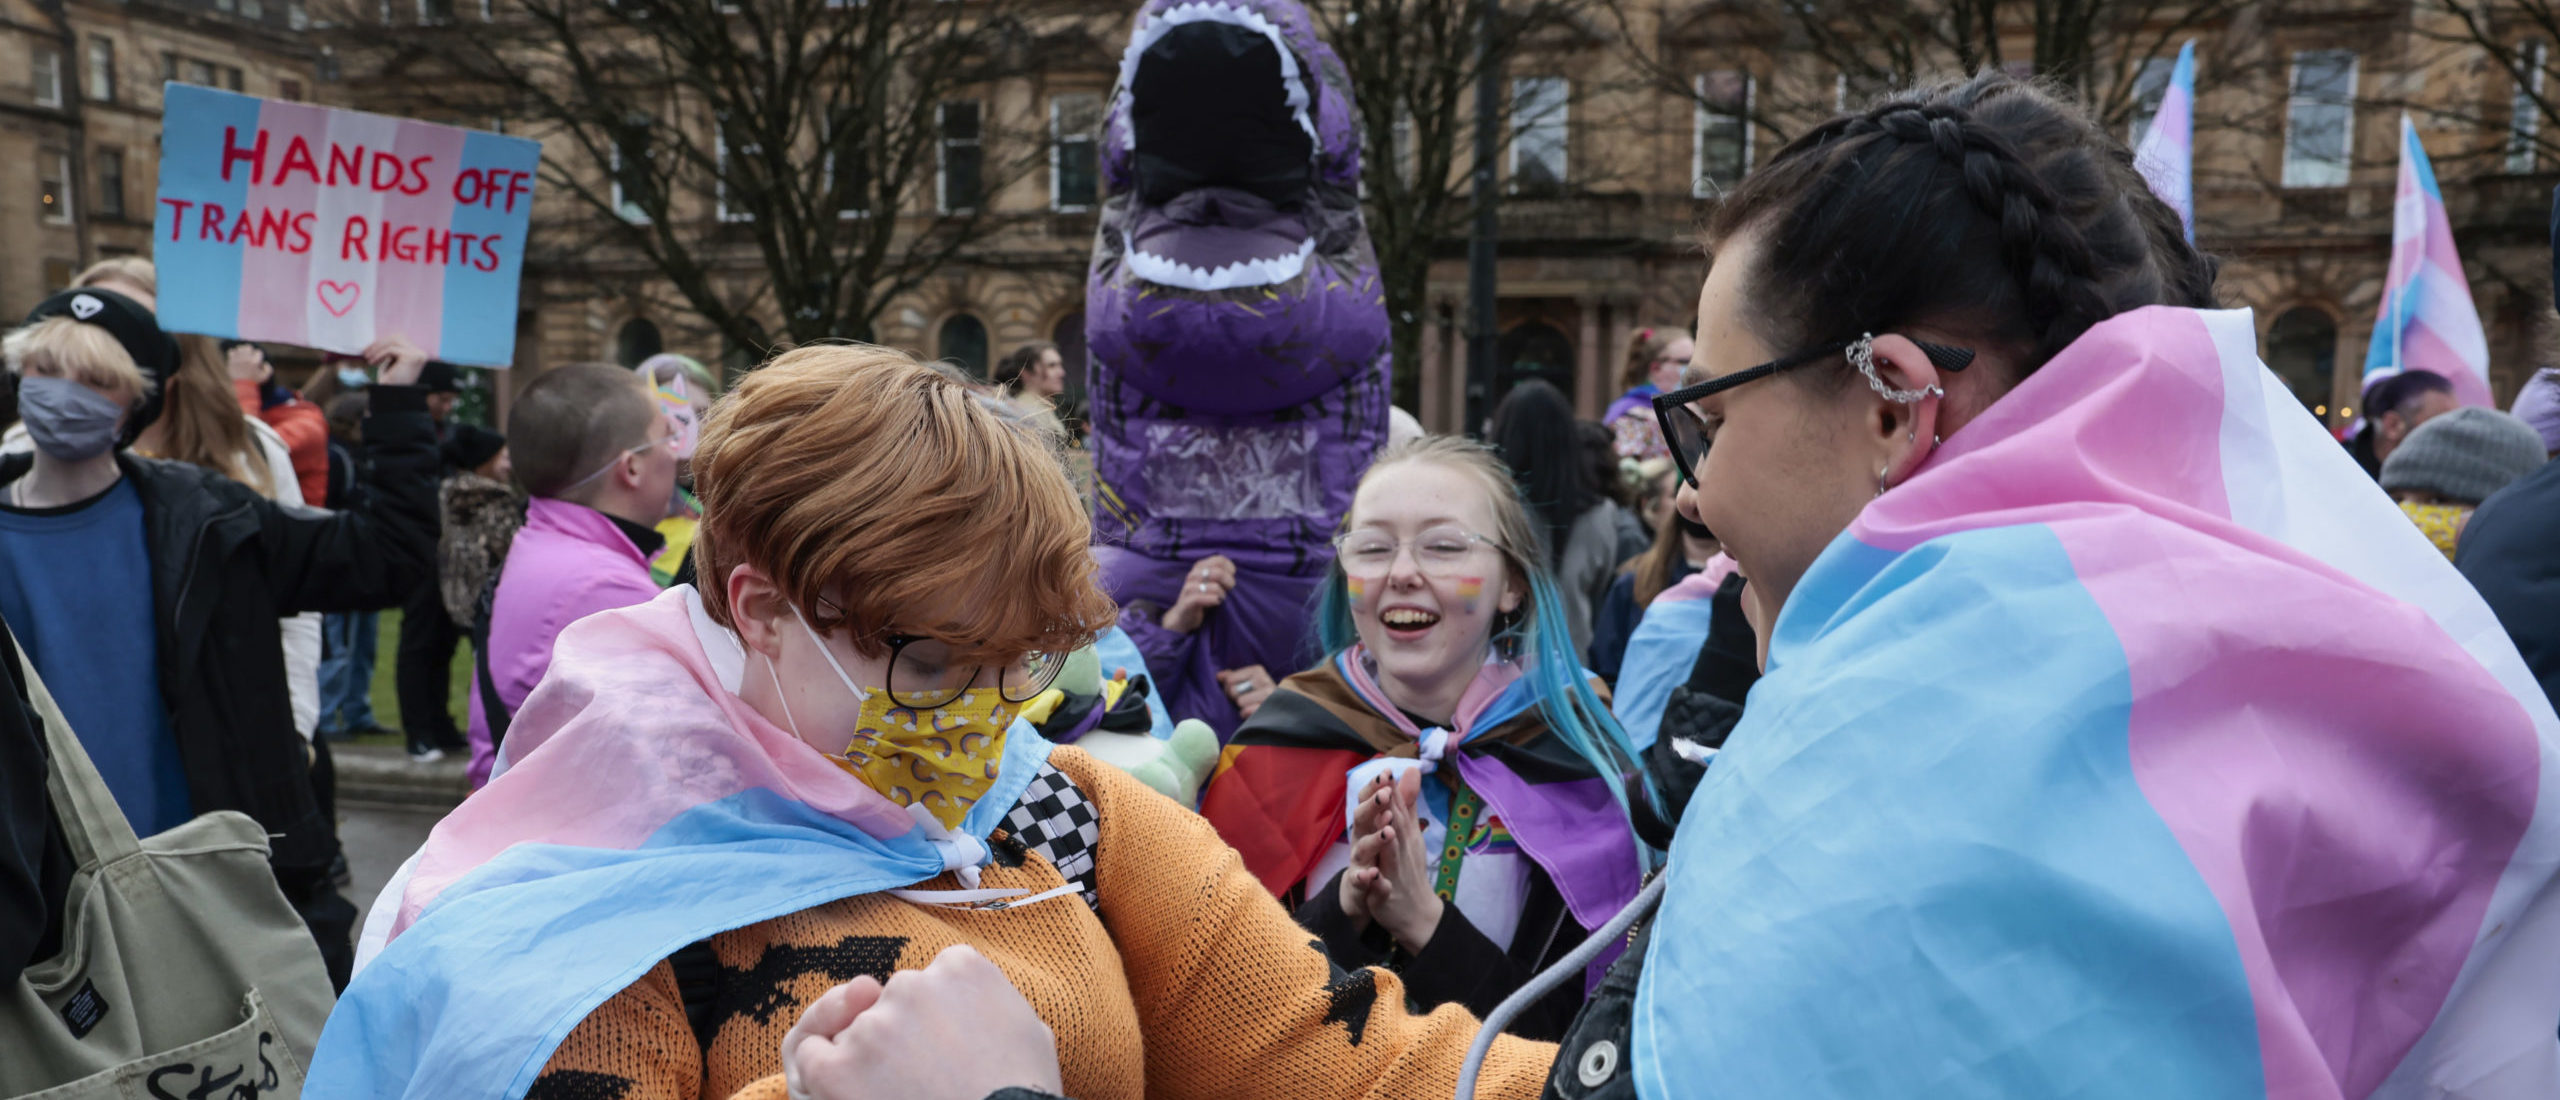 GLASGOW, SCOTLAND - FEBRUARY 05: Members of the public counterprotest against a Standing for Women event attended by anti-transgender-rights activist Kellie-Jay Keen on February 05, 2023 in Glasgow, Scotland. (Photo by Jeff J Mitchell/Getty Images)